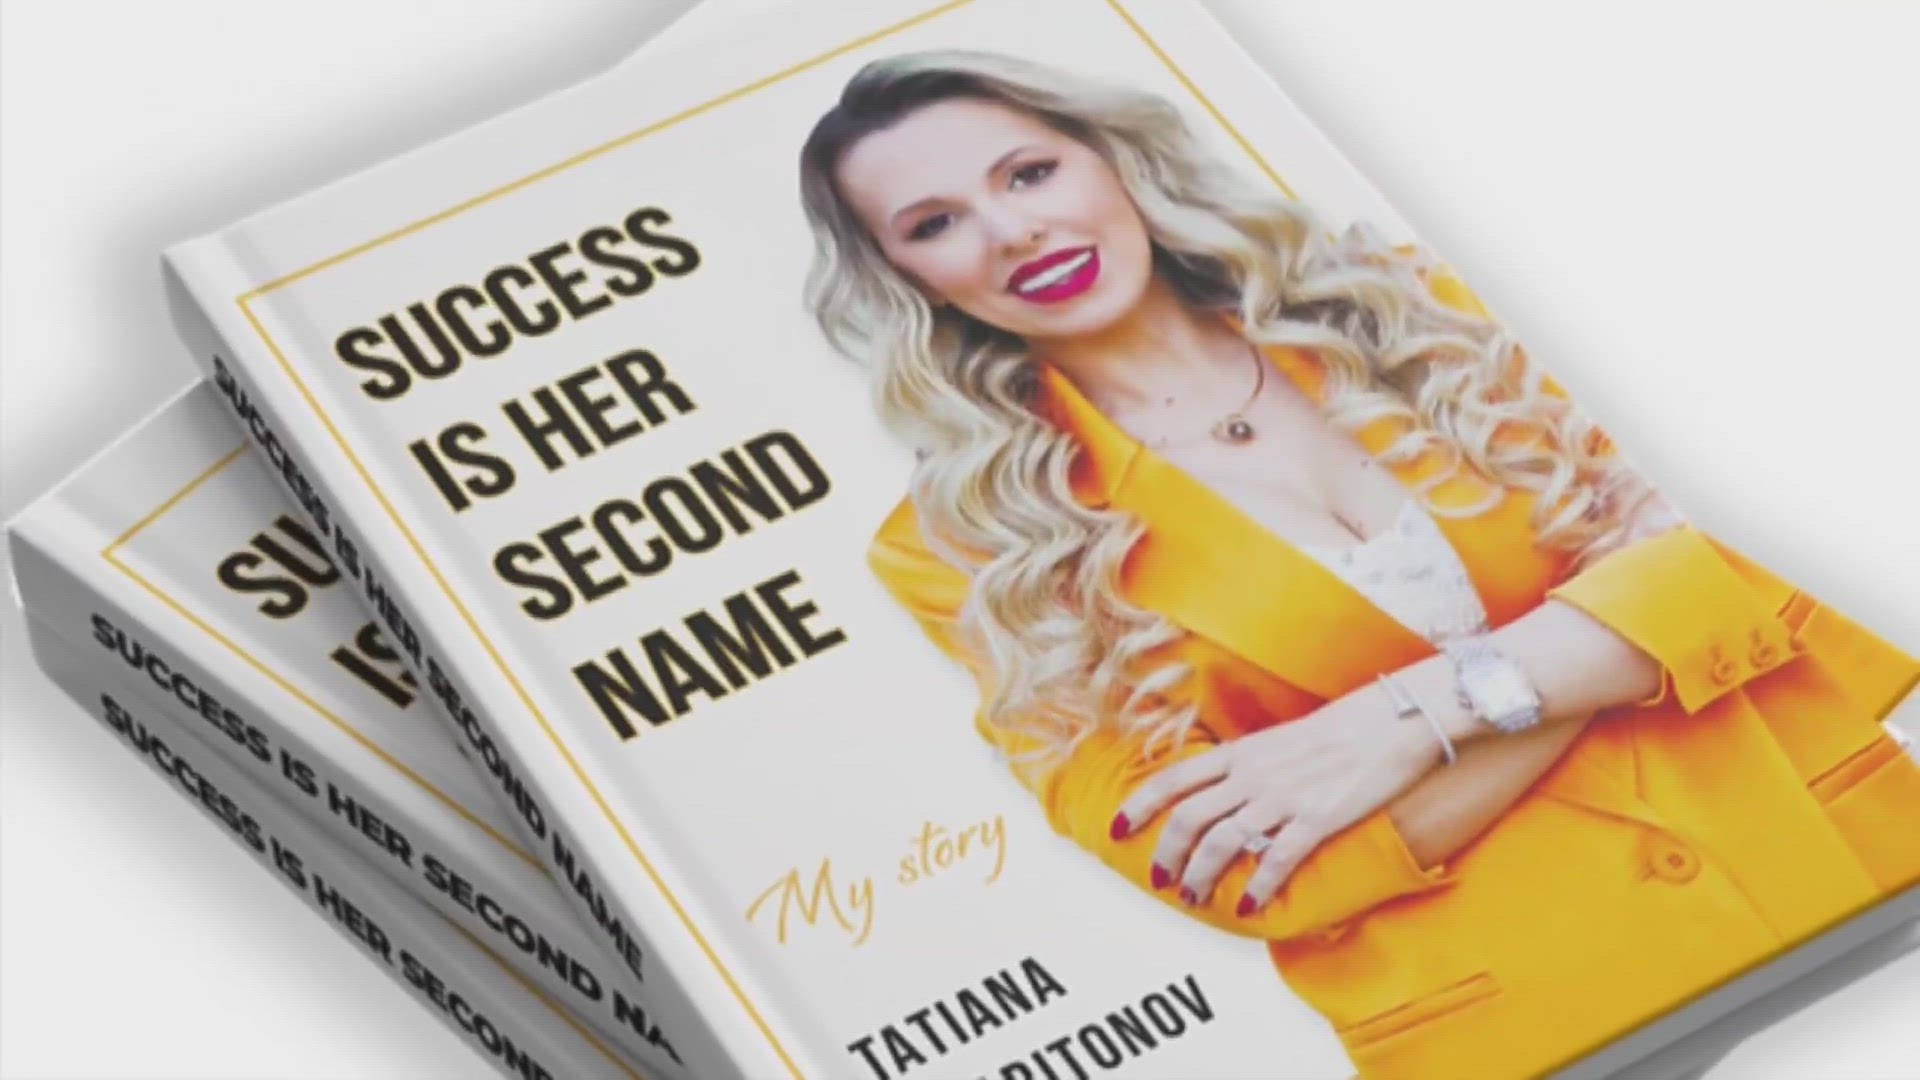 Tatyana Kharitonov is a Ukrainian immigrant, who has released a new book called "Success is Her Second Name."